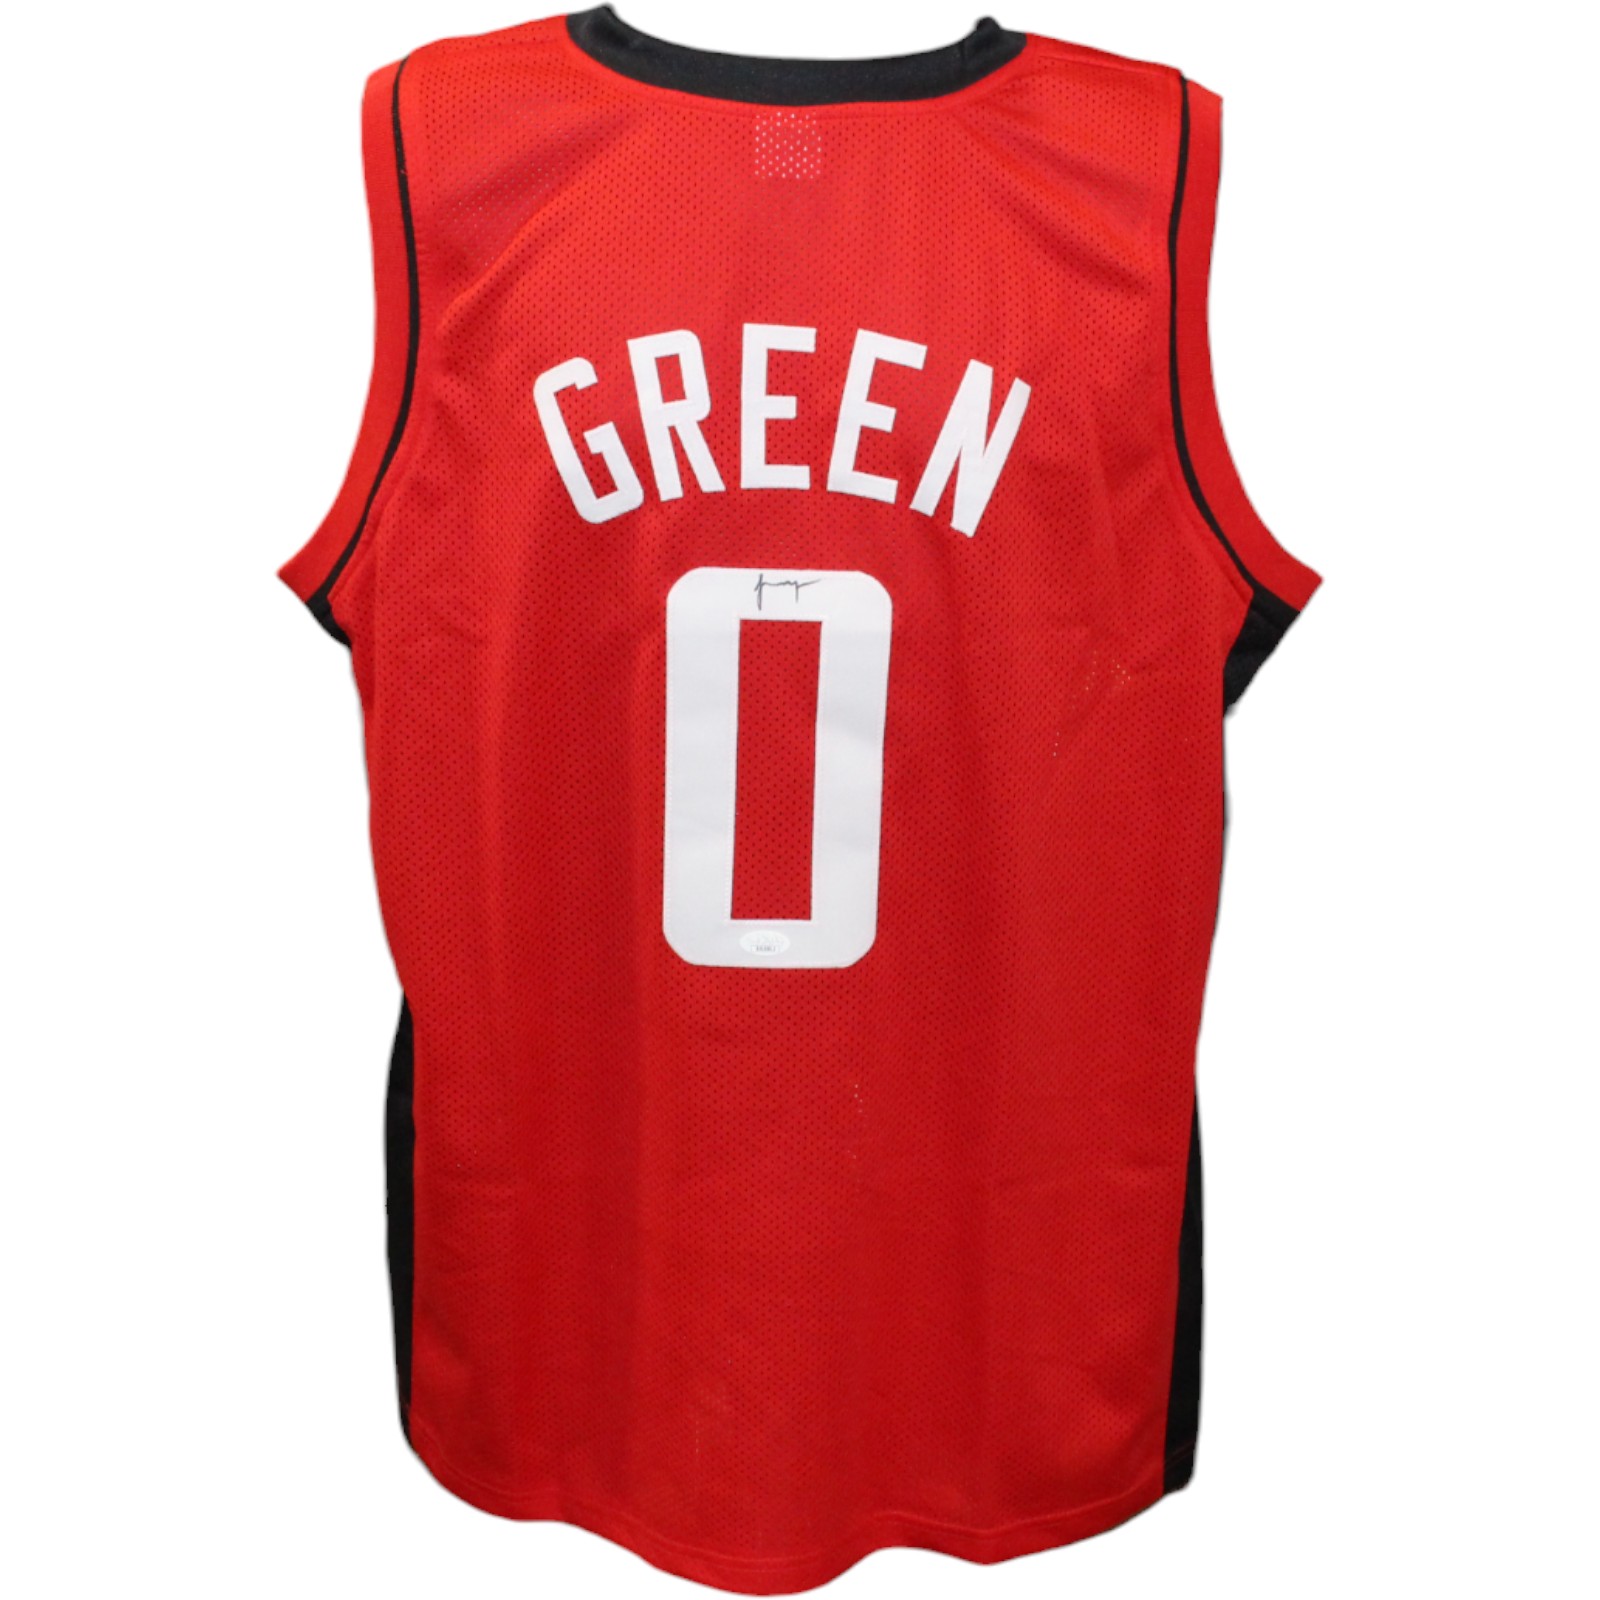 Jalen Green Autographed/Signed Pro Style Red Jersey JSA